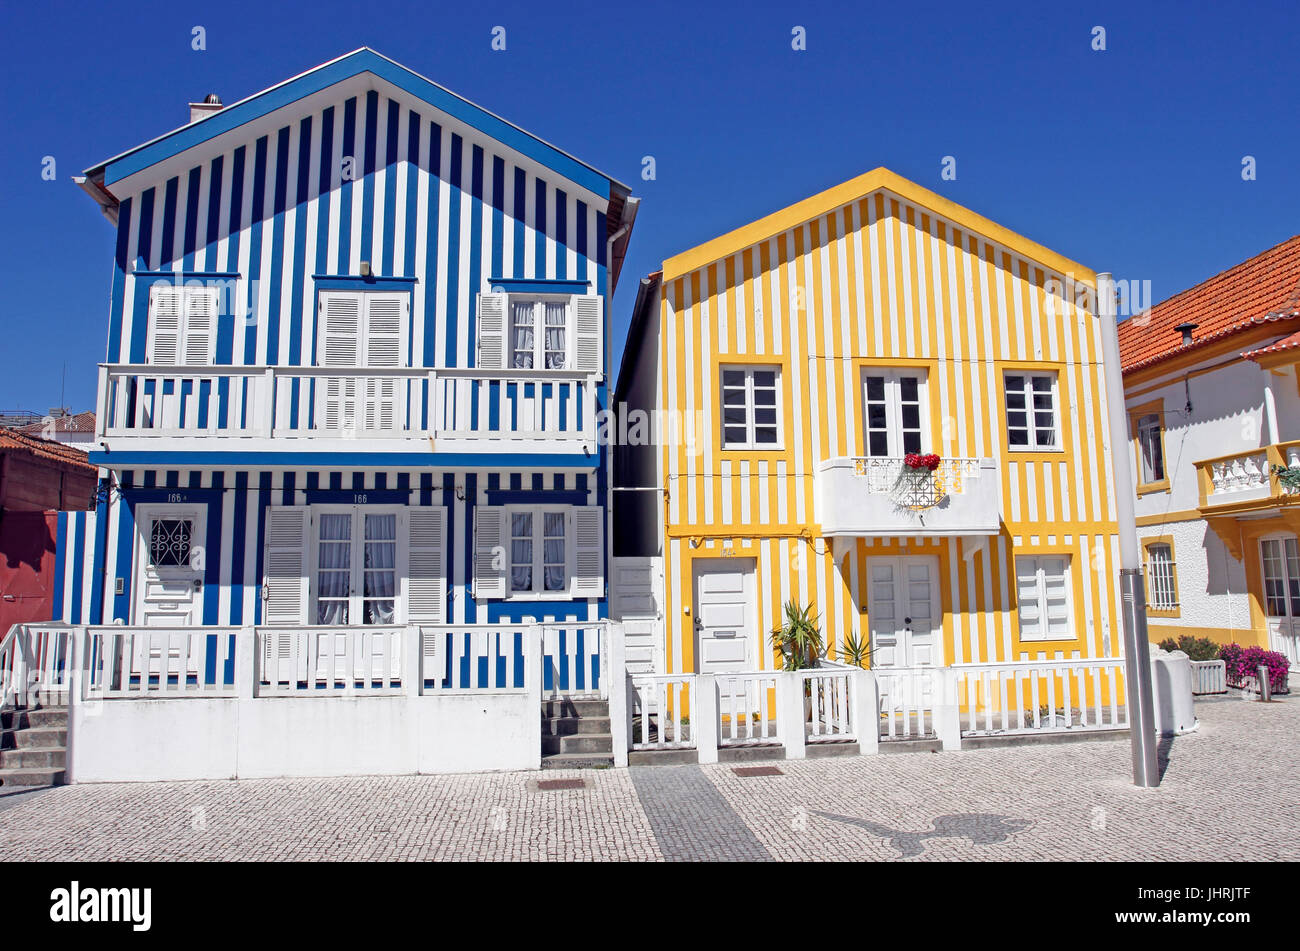 Colorful candy striped cottages in Costa Nova near Aveiro Portugal Stock Photo